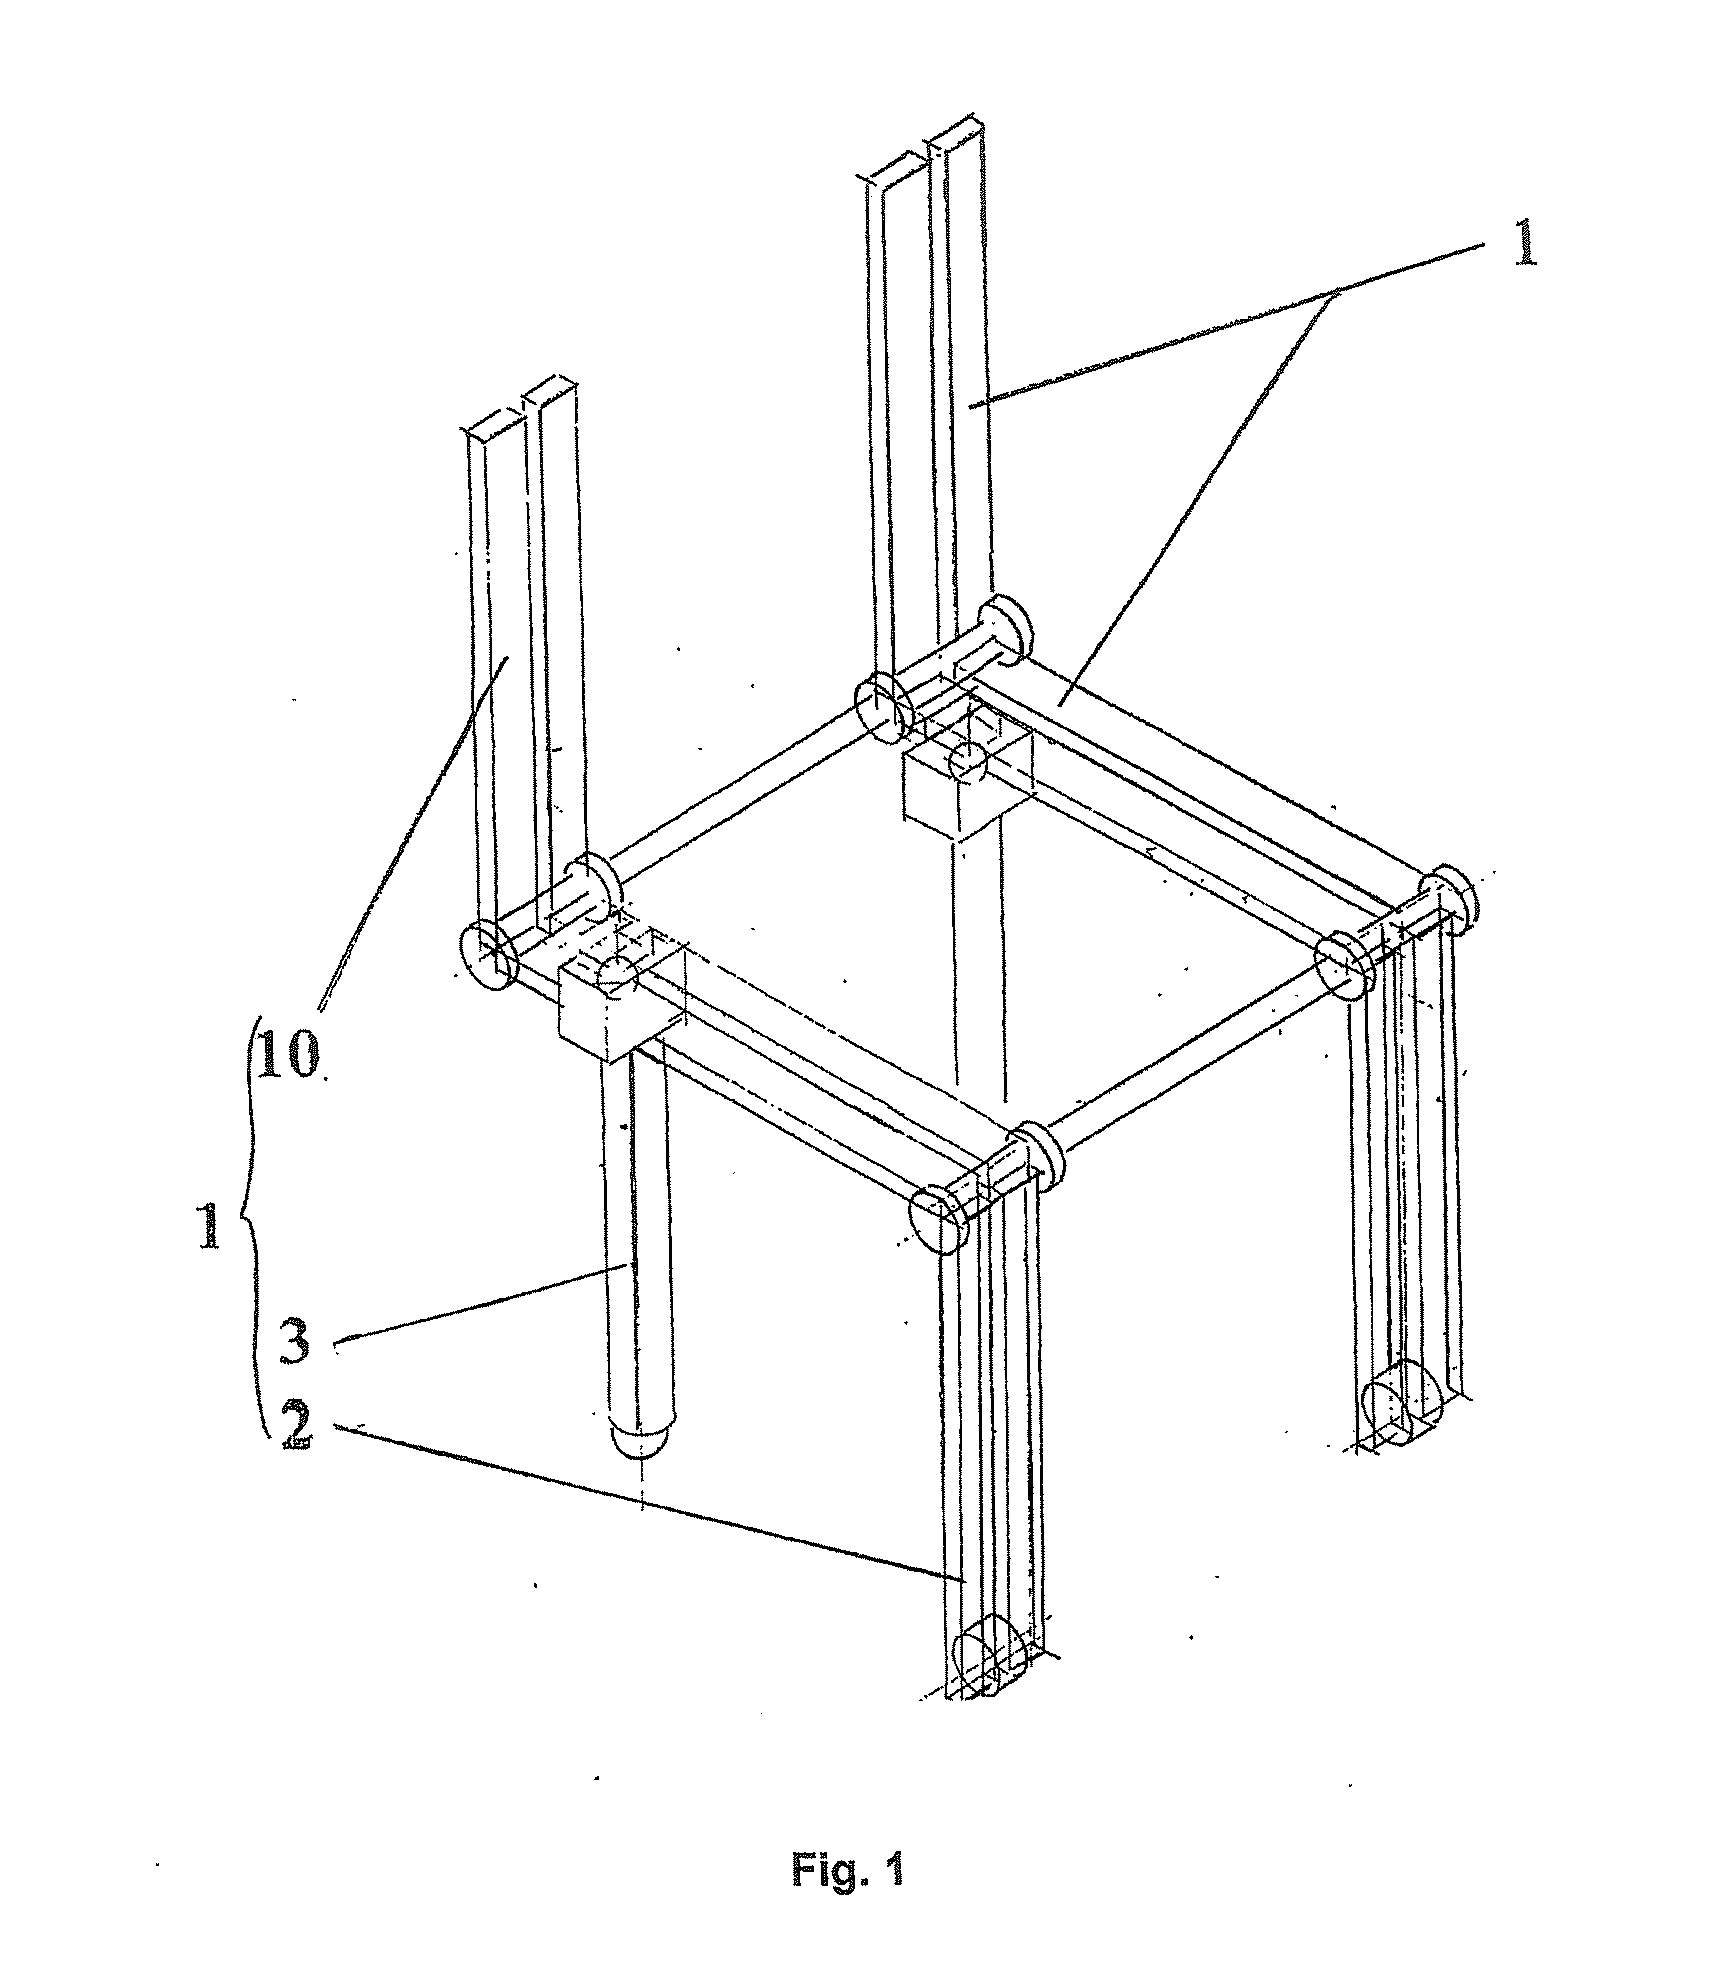 Device for Facilitating Access to a Sanitary Fitting